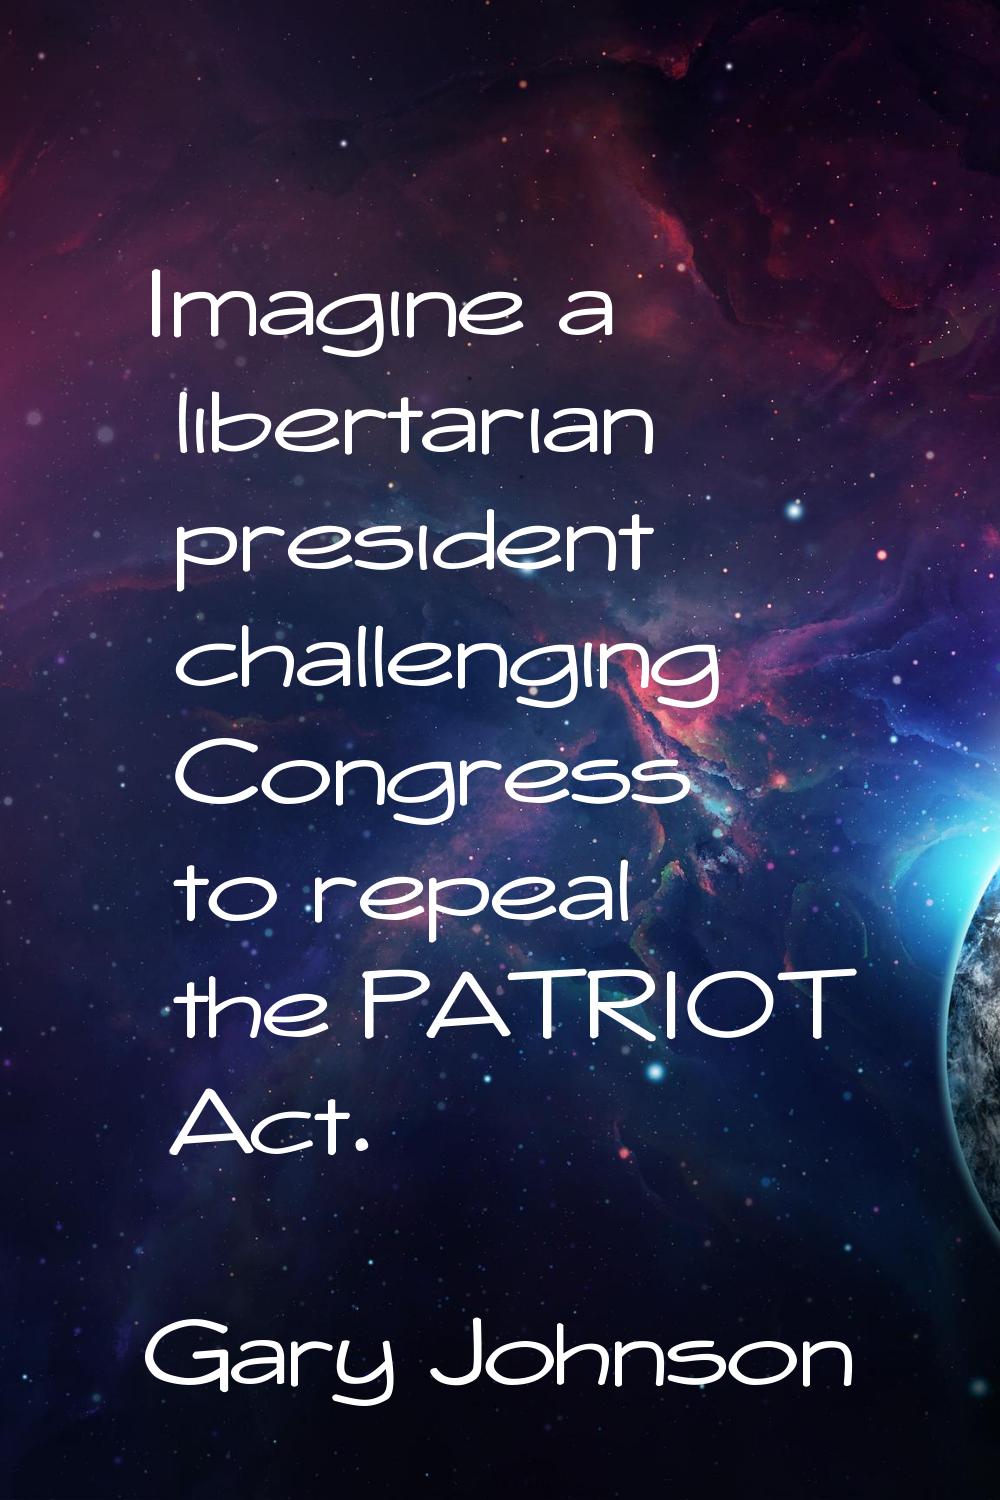 Imagine a libertarian president challenging Congress to repeal the PATRIOT Act.